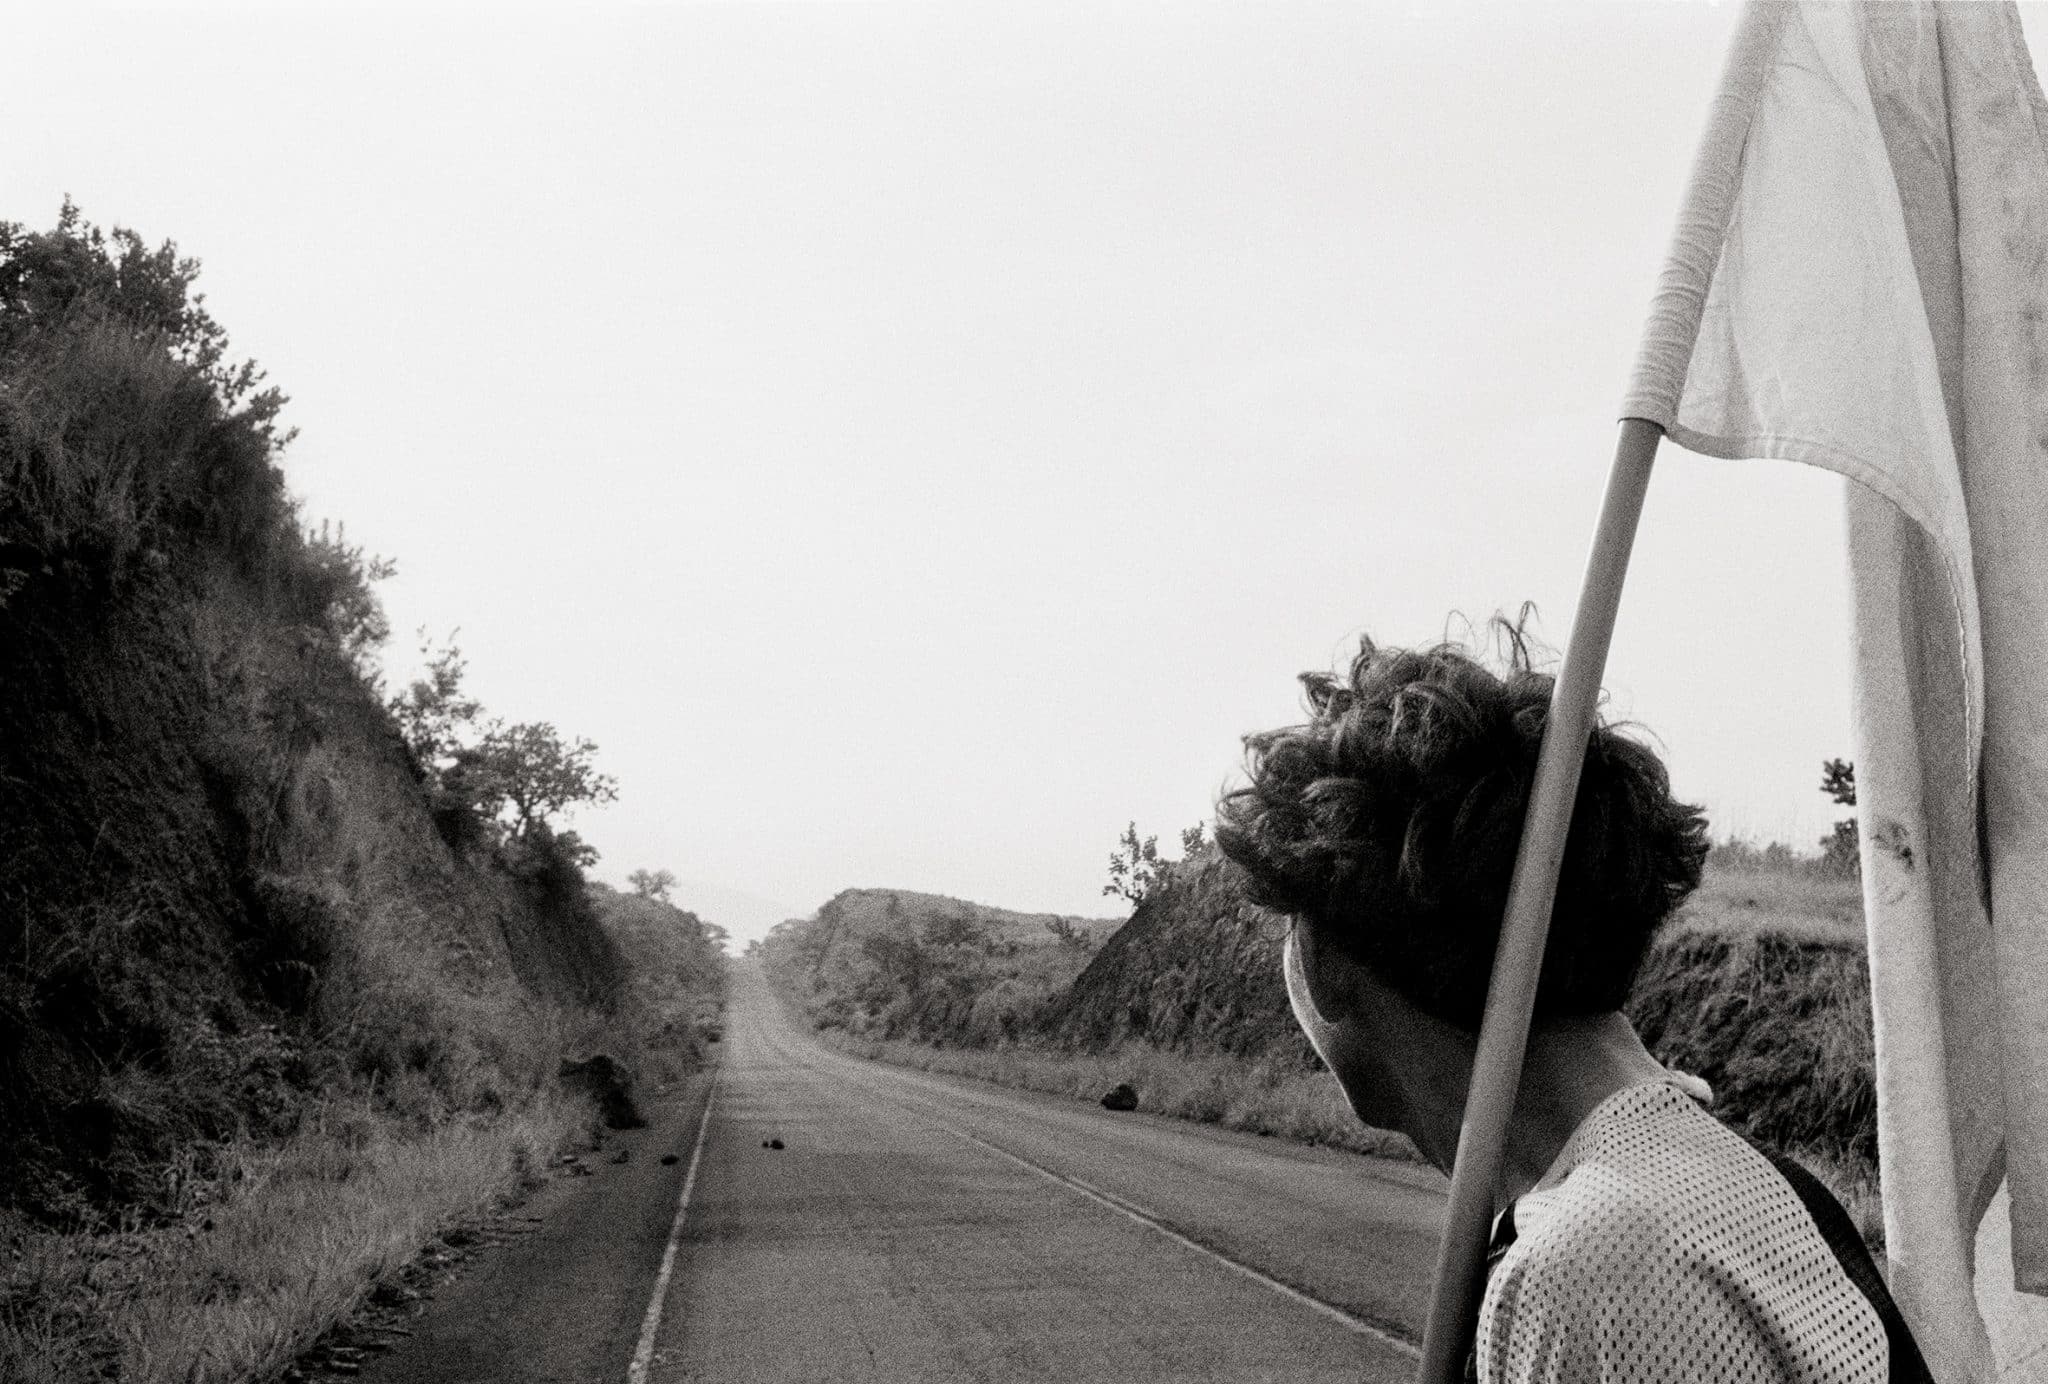 A Salvadoran journalist displays a white flag to show FPL guerrillas that
he travels in peace on the Pan American Highway. Department of San Vicente,
June 1983 © Robert Nickelsberg